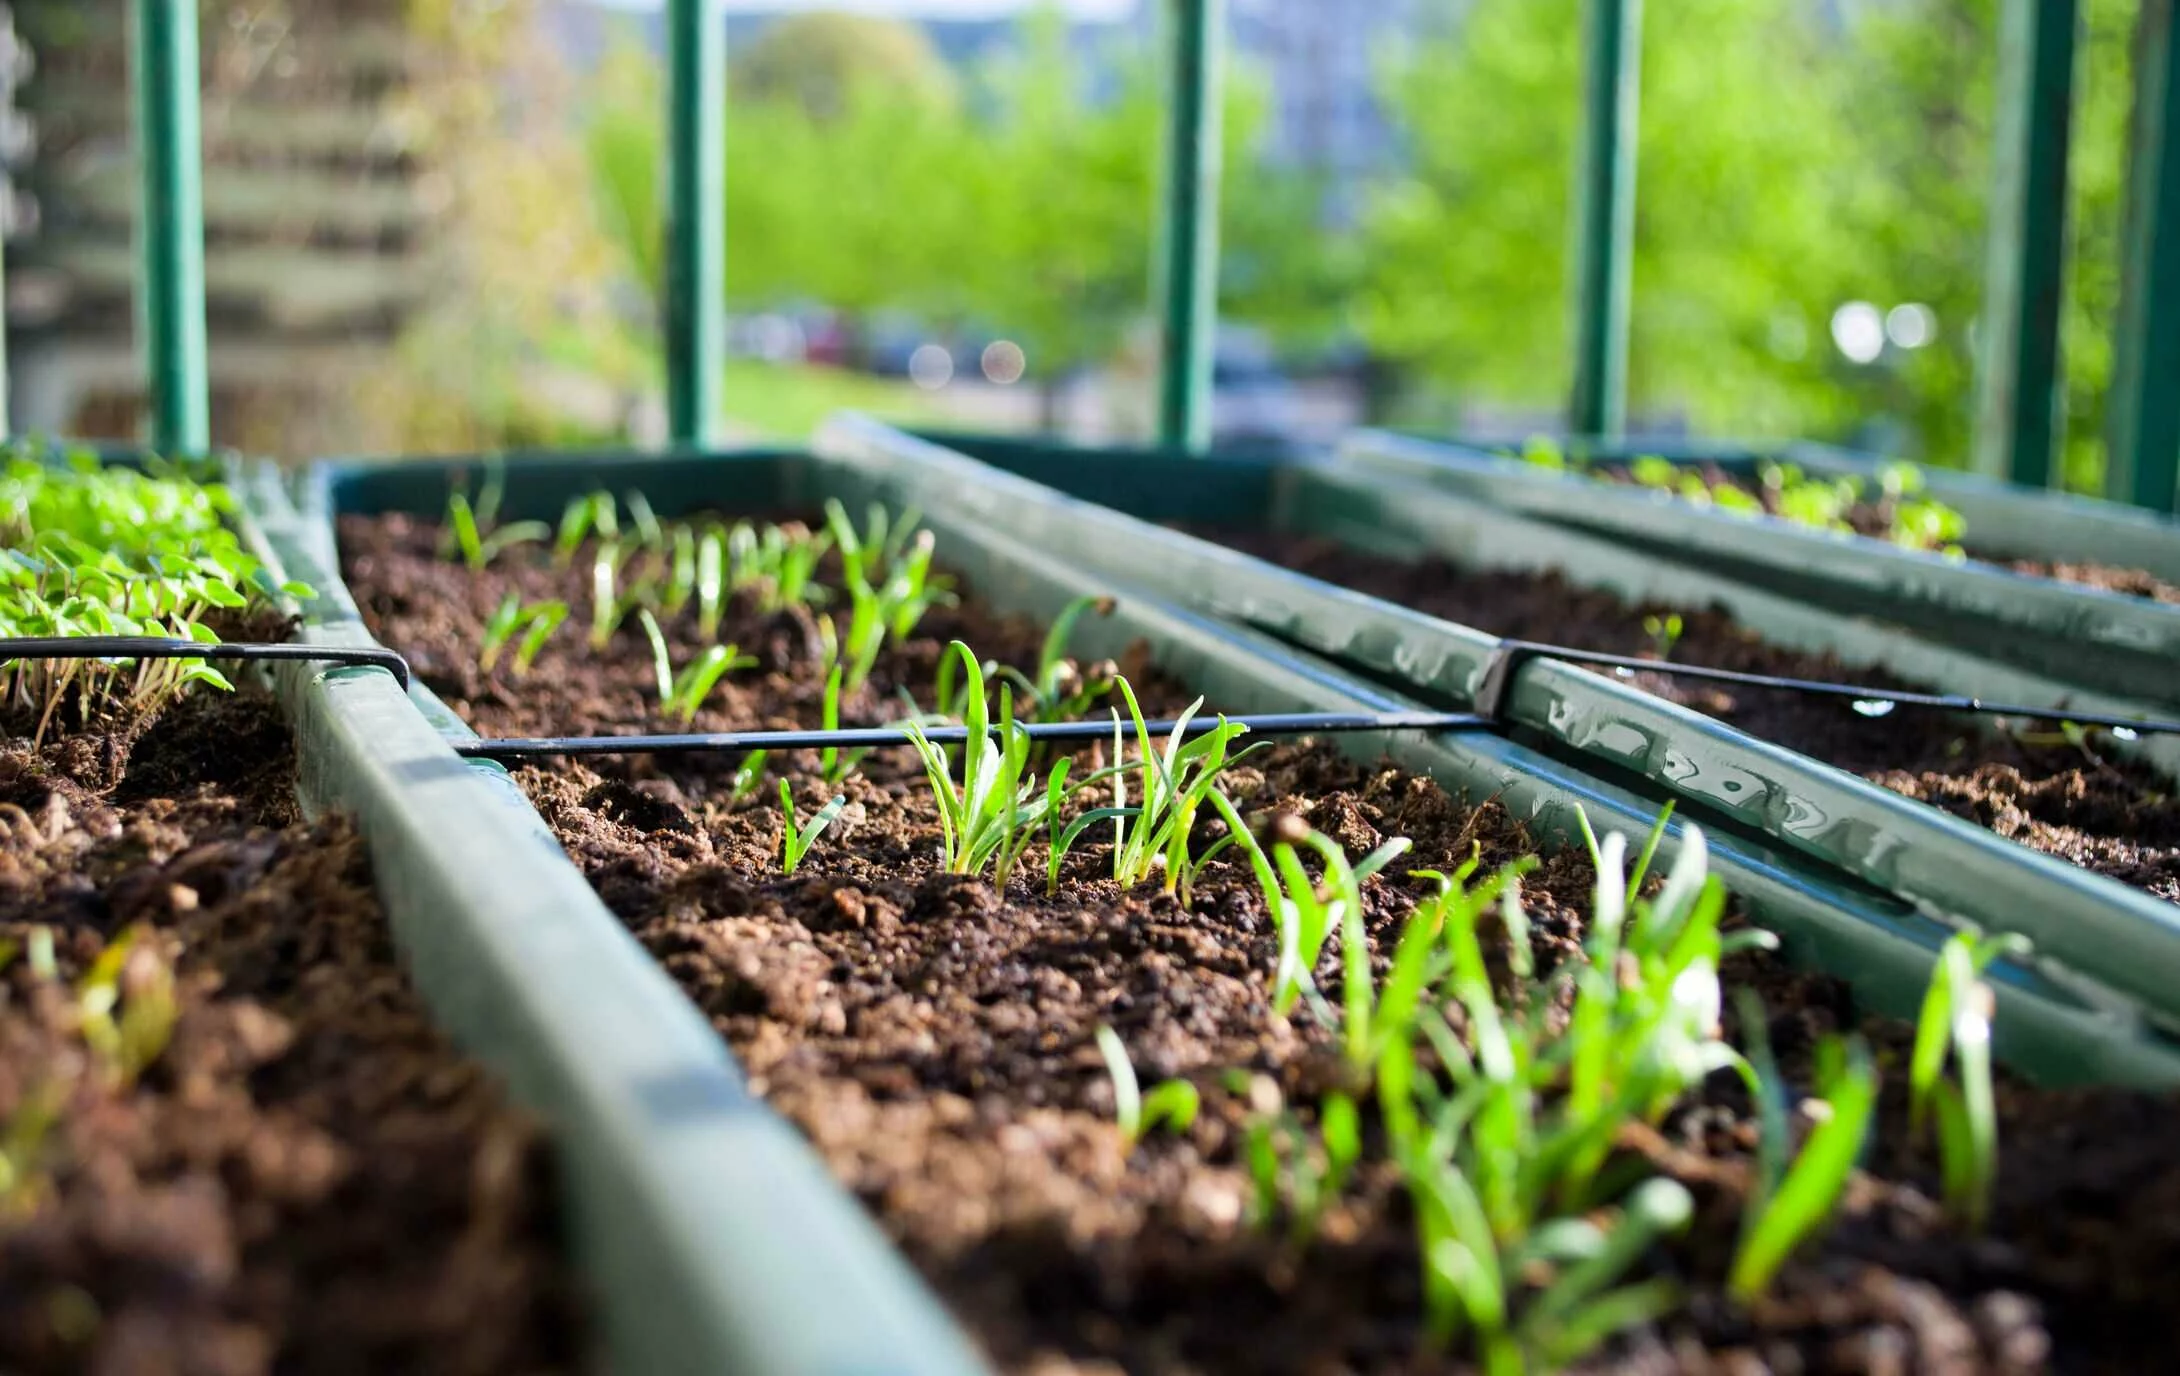 On Earth Day 2020, learn all about urban gardening